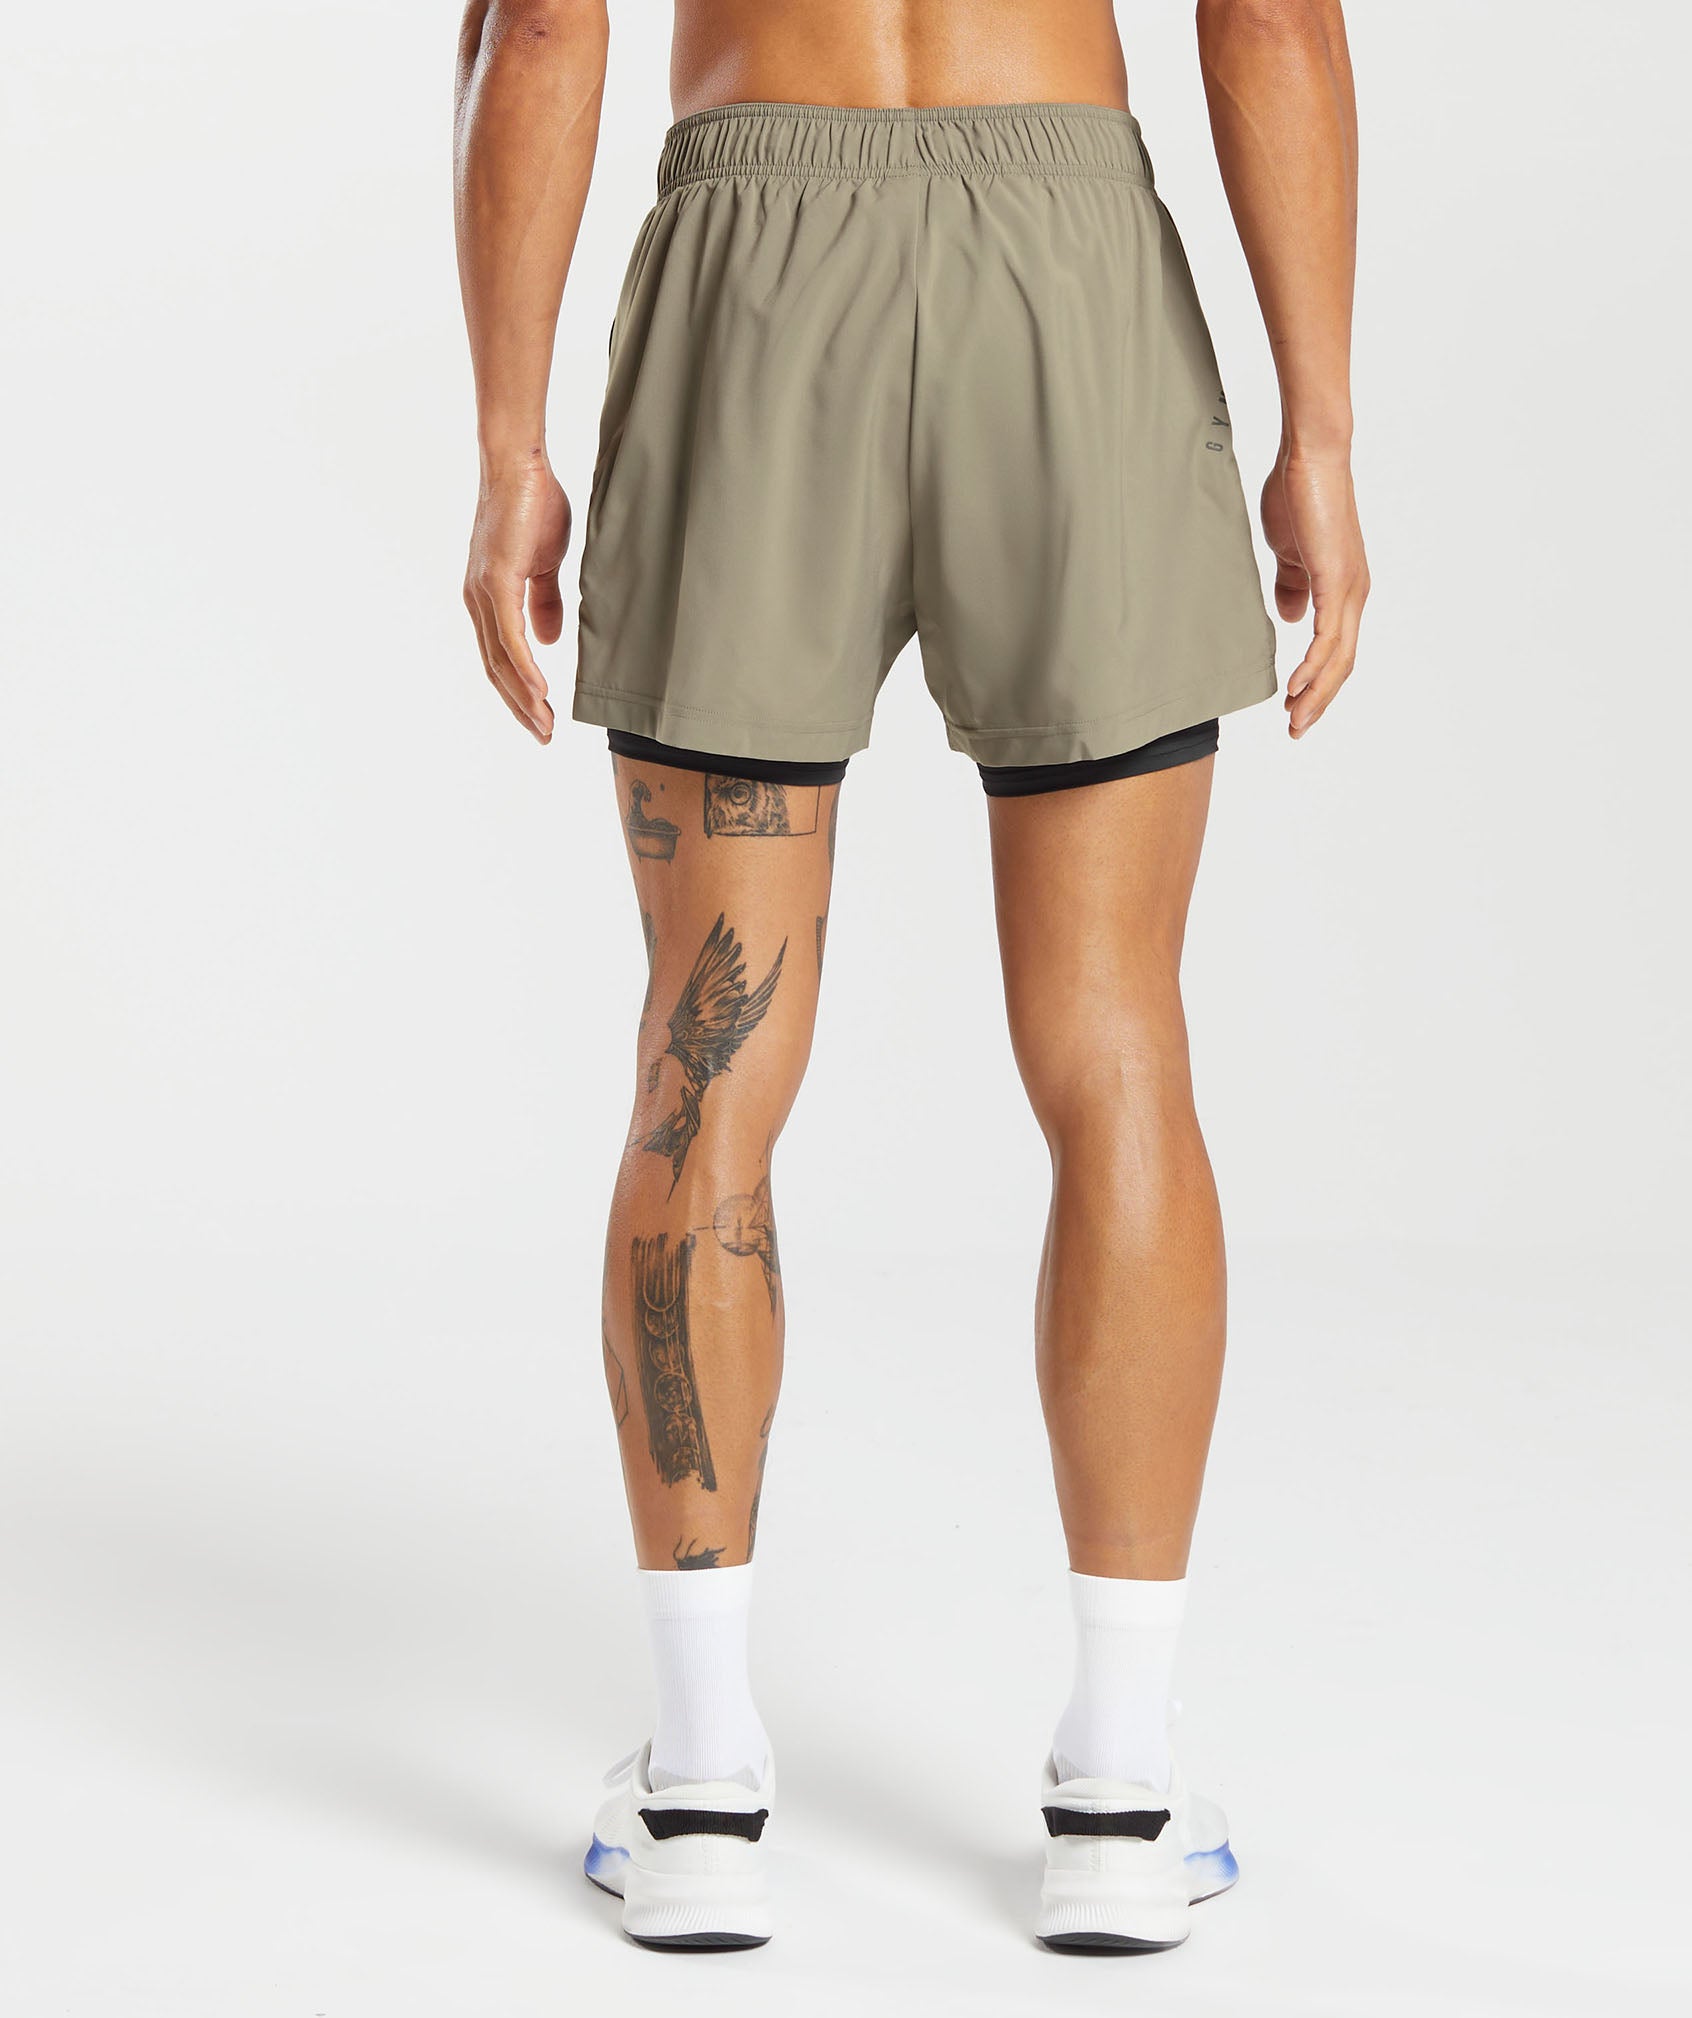 Sport 5" 2 in 1 Shorts in Linen Brown/Black - view 2